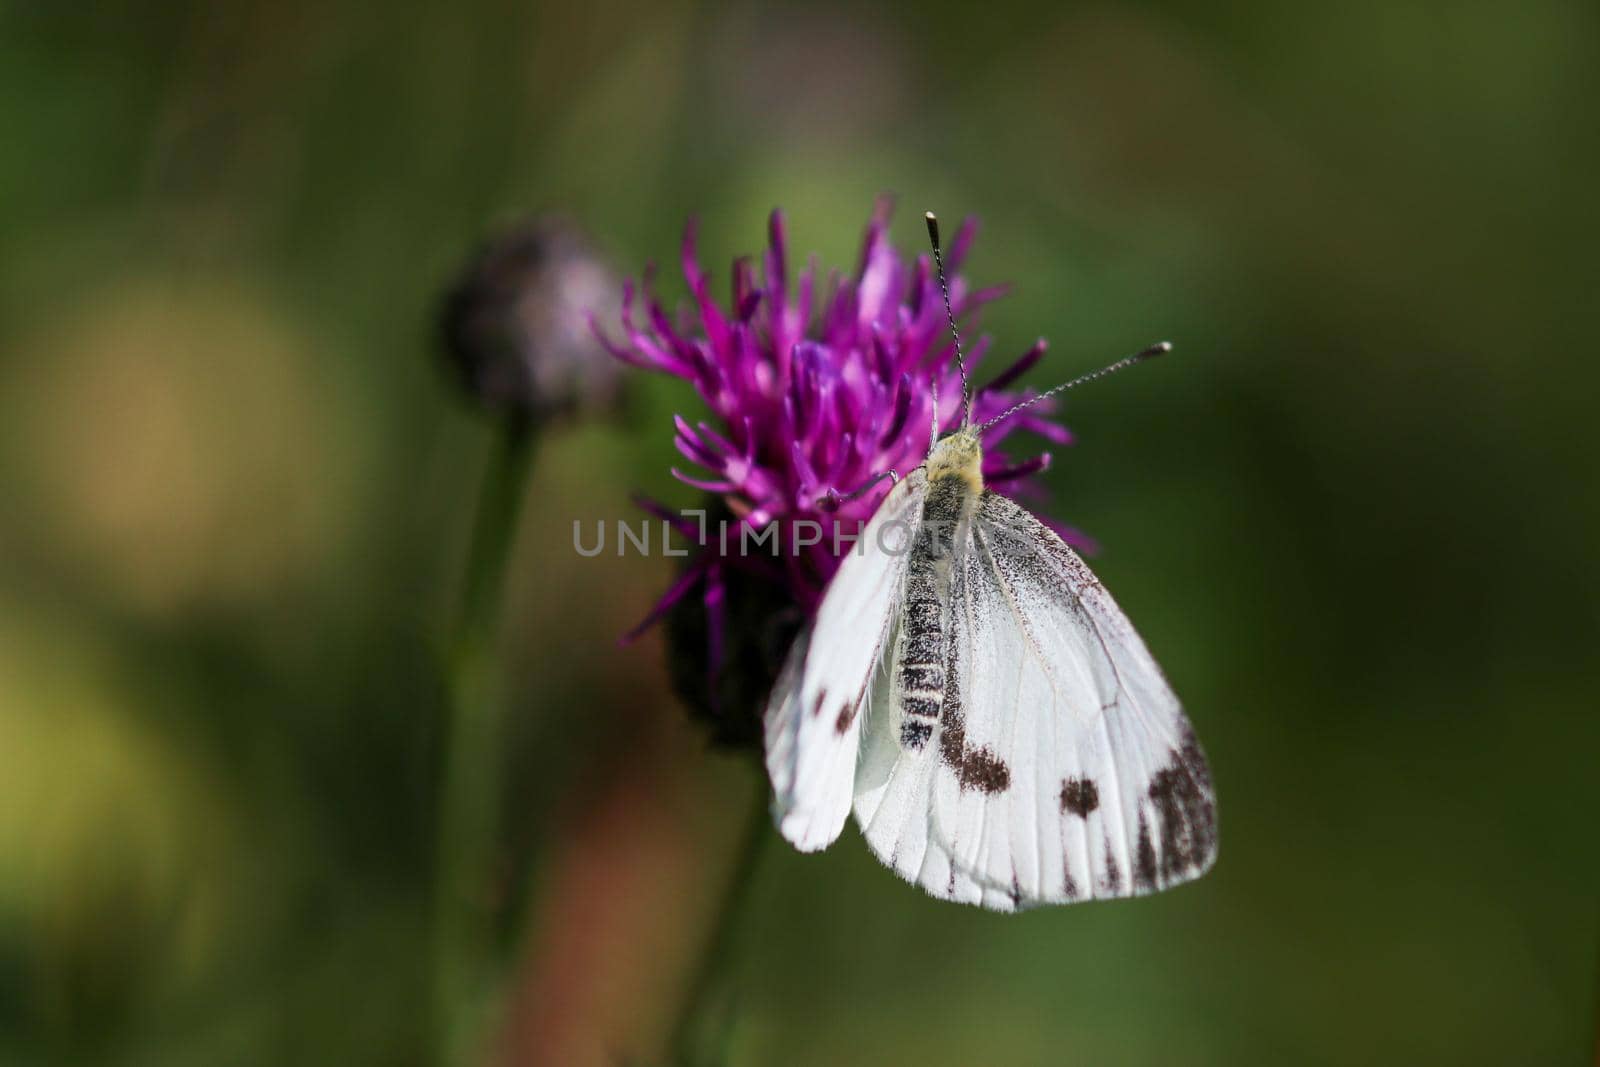 Cabbage white butterfly takes nectar from thistle blossom